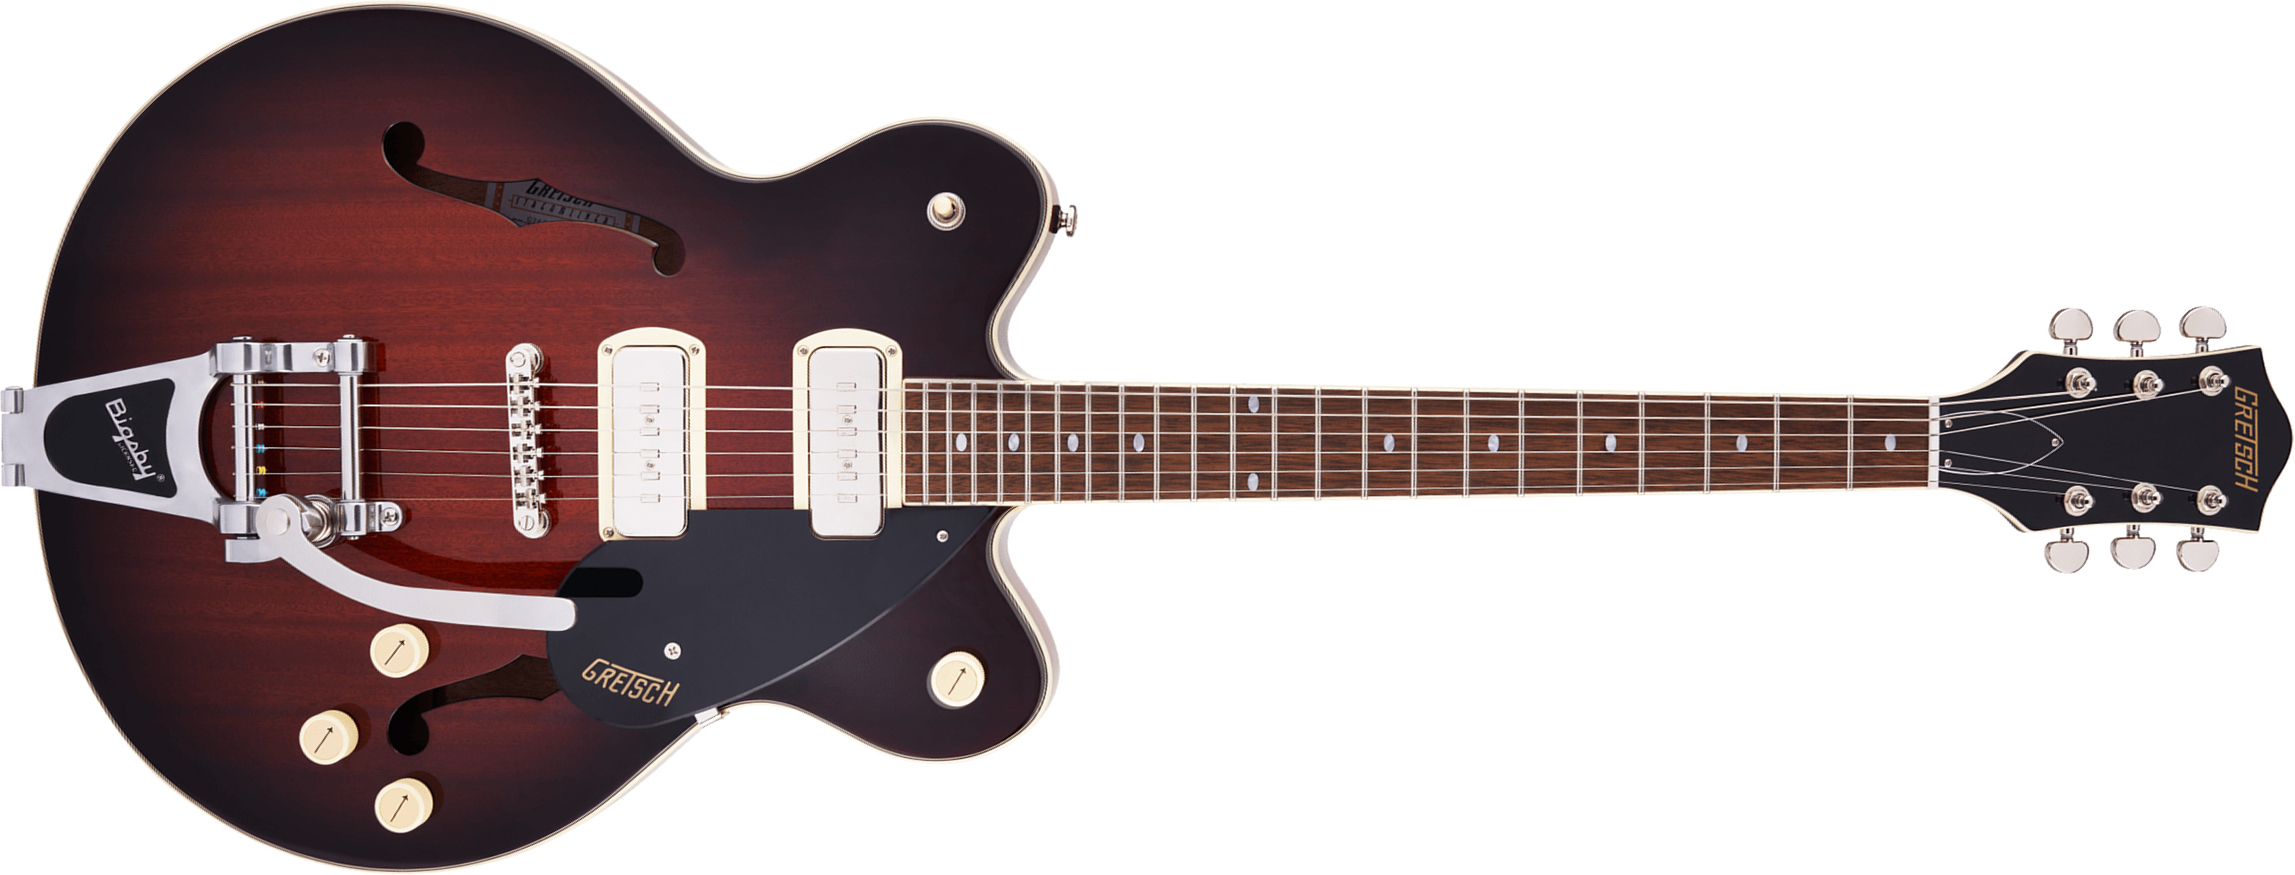 Gretsch G2622t-p90 Streamliner Bigsby Ss Trem Lau - Forge Glow - Semi-hollow electric guitar - Main picture